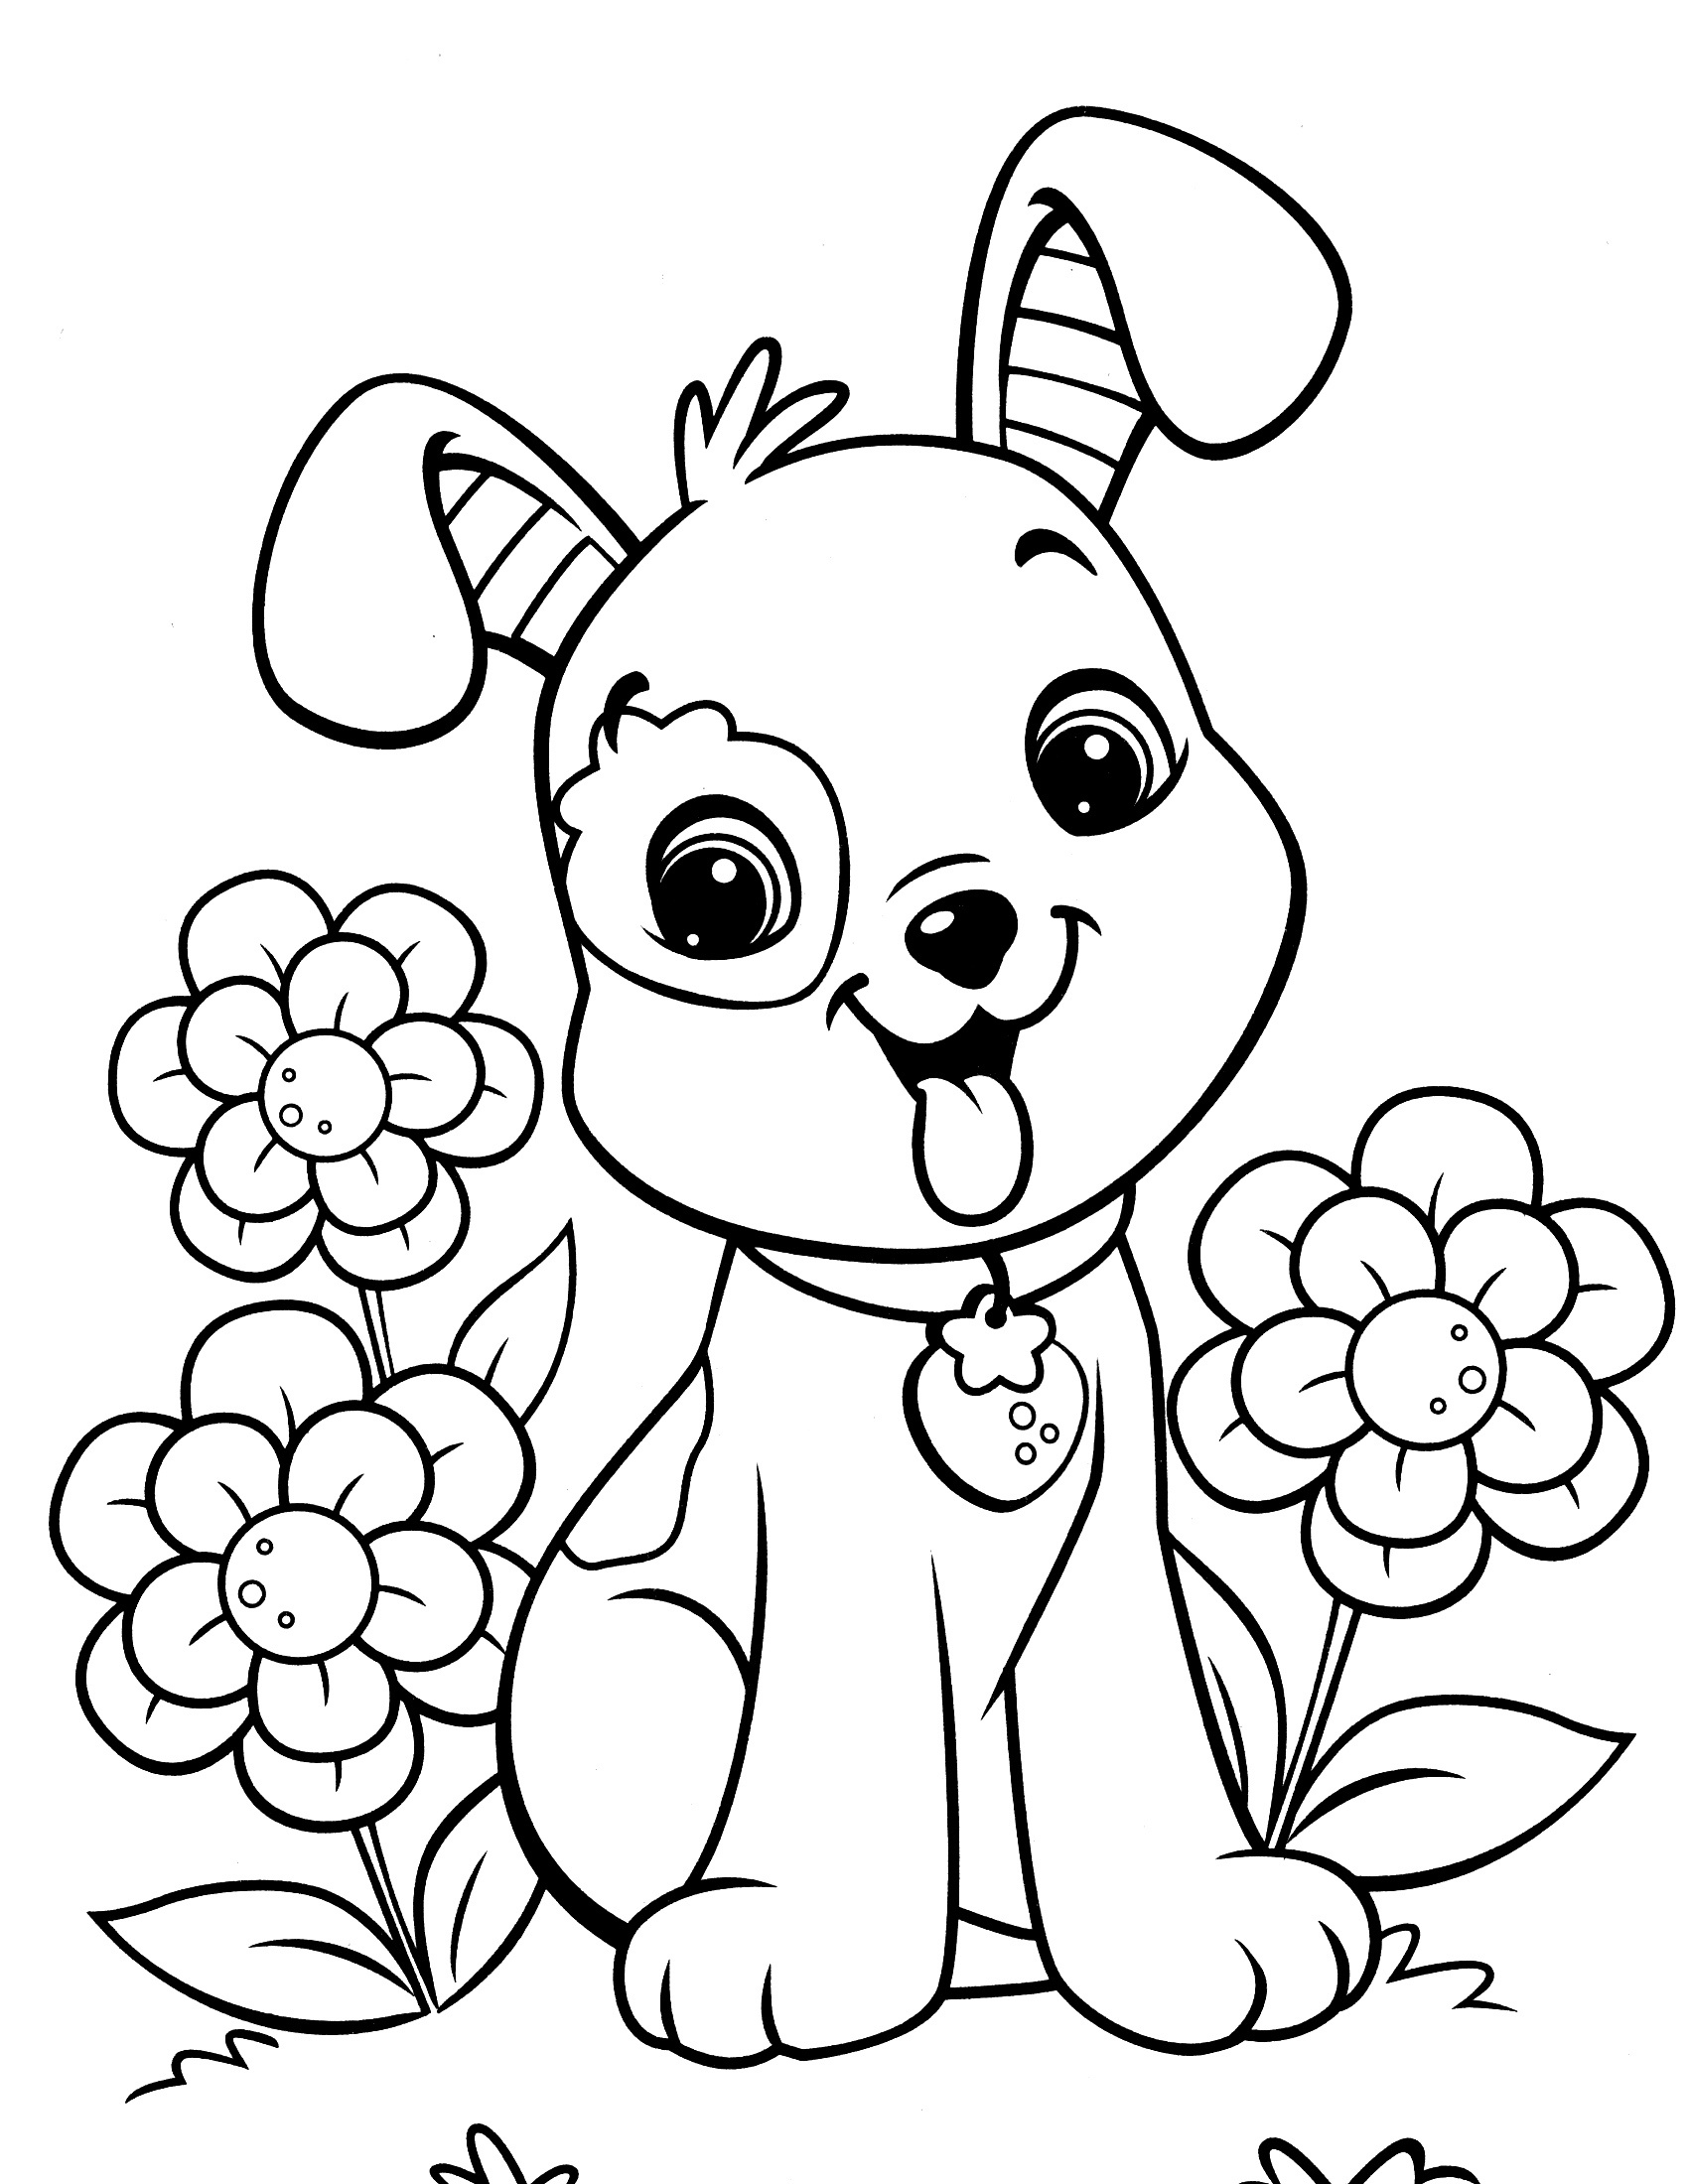 Dog Coloring Pages For Adults Dog Colorings Easy Free Printable - Free Printable Dog Coloring Pages